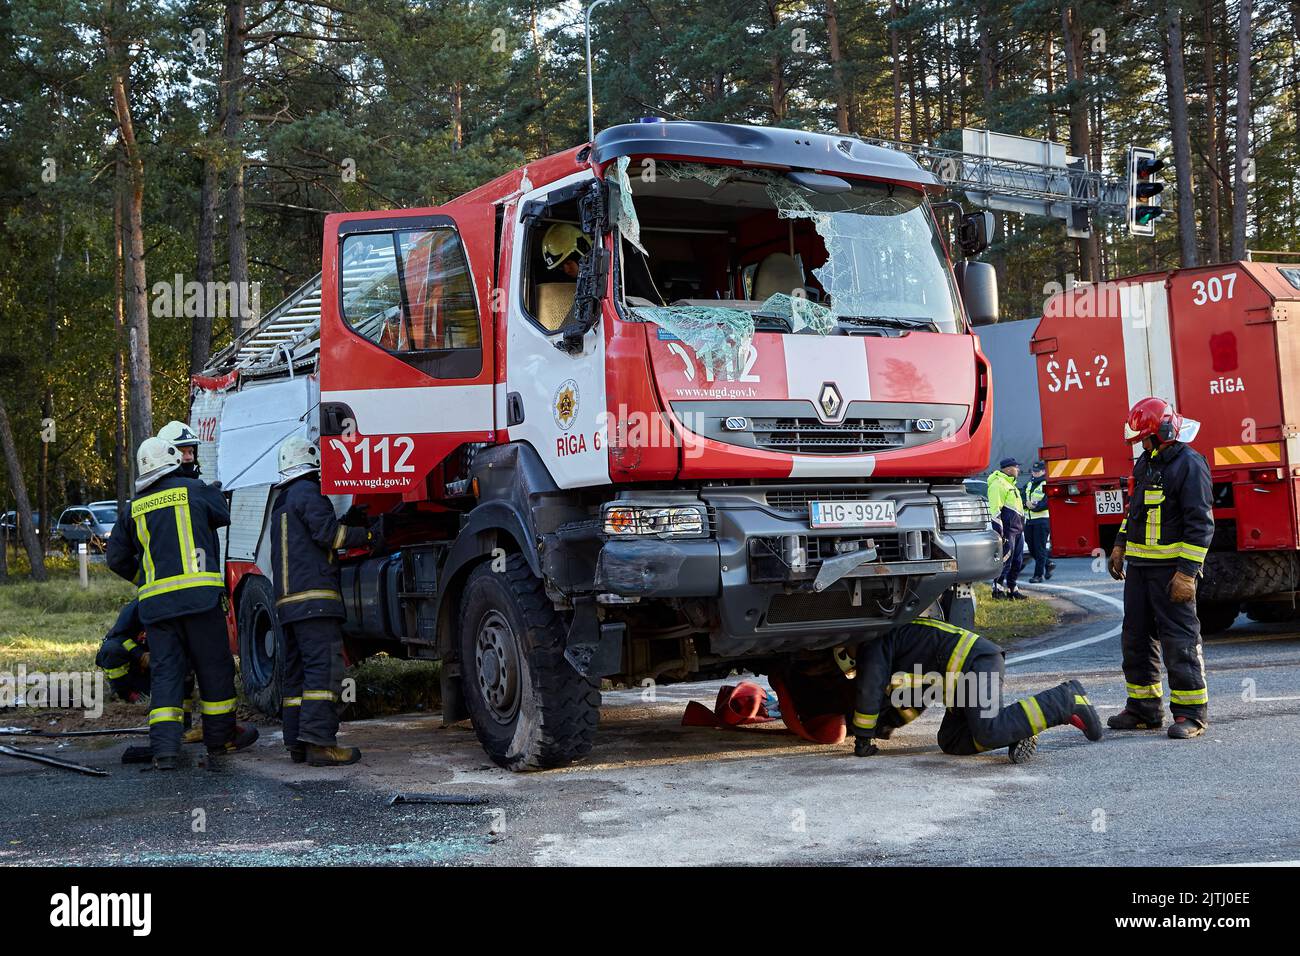 September 30, 2021,Upesciems Latvia: car accident on a road, fire truck after a collision with a car, transportation background Stock Photo